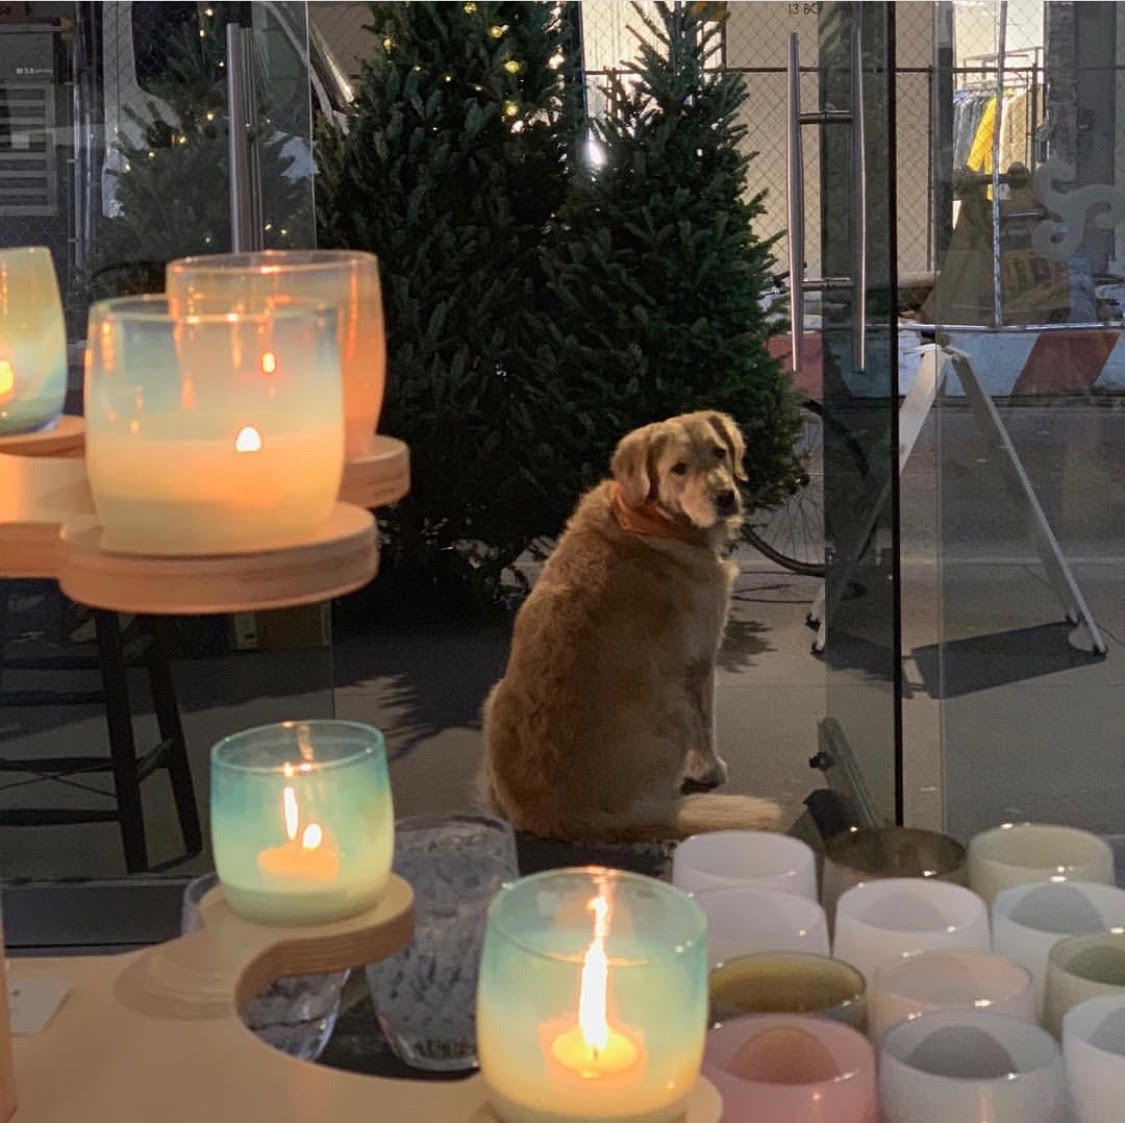 People, most beautiful @glassybaby in #Manhattan. 10% of proceeds to NYC charities. 2 Rivington Street ... Merry Christmas. - Stone bit.ly/glassybabynyc